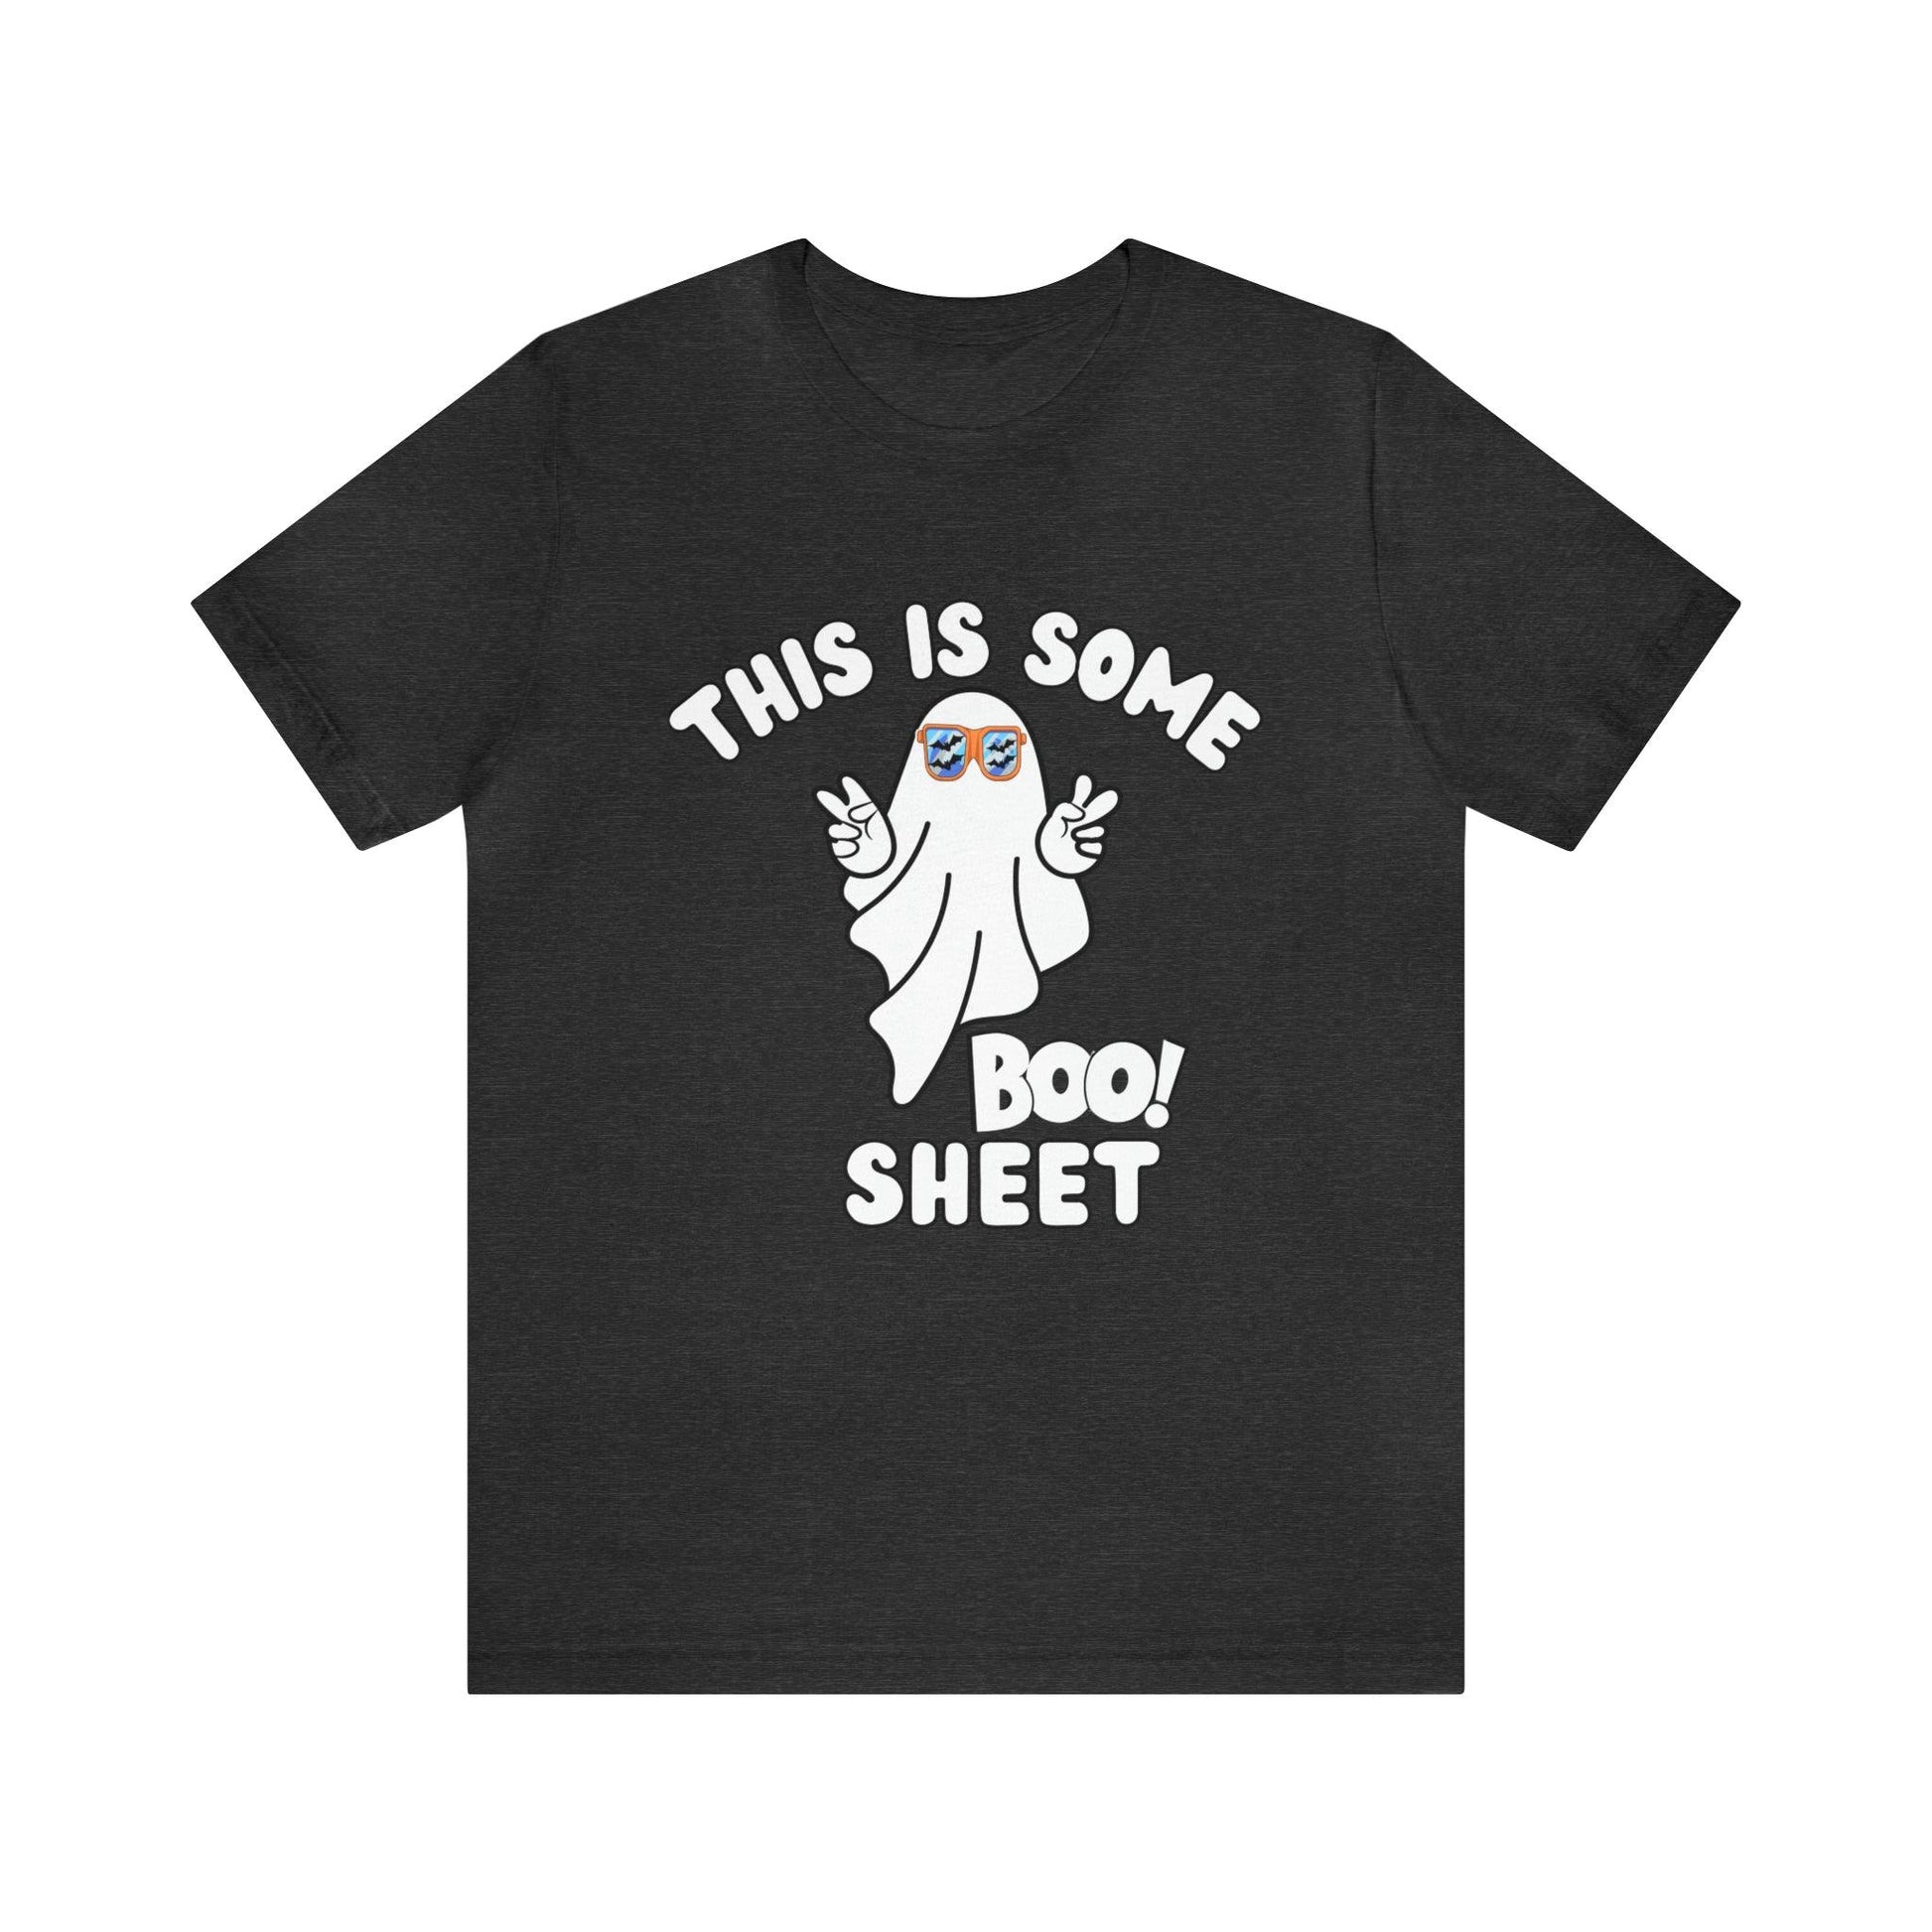 This Is Some Boo Sheet Funny Halloween Shirt Funny Halloween Costume Spooky Season Tee Funny Gift Shirt for other occasions - Giftsmojo